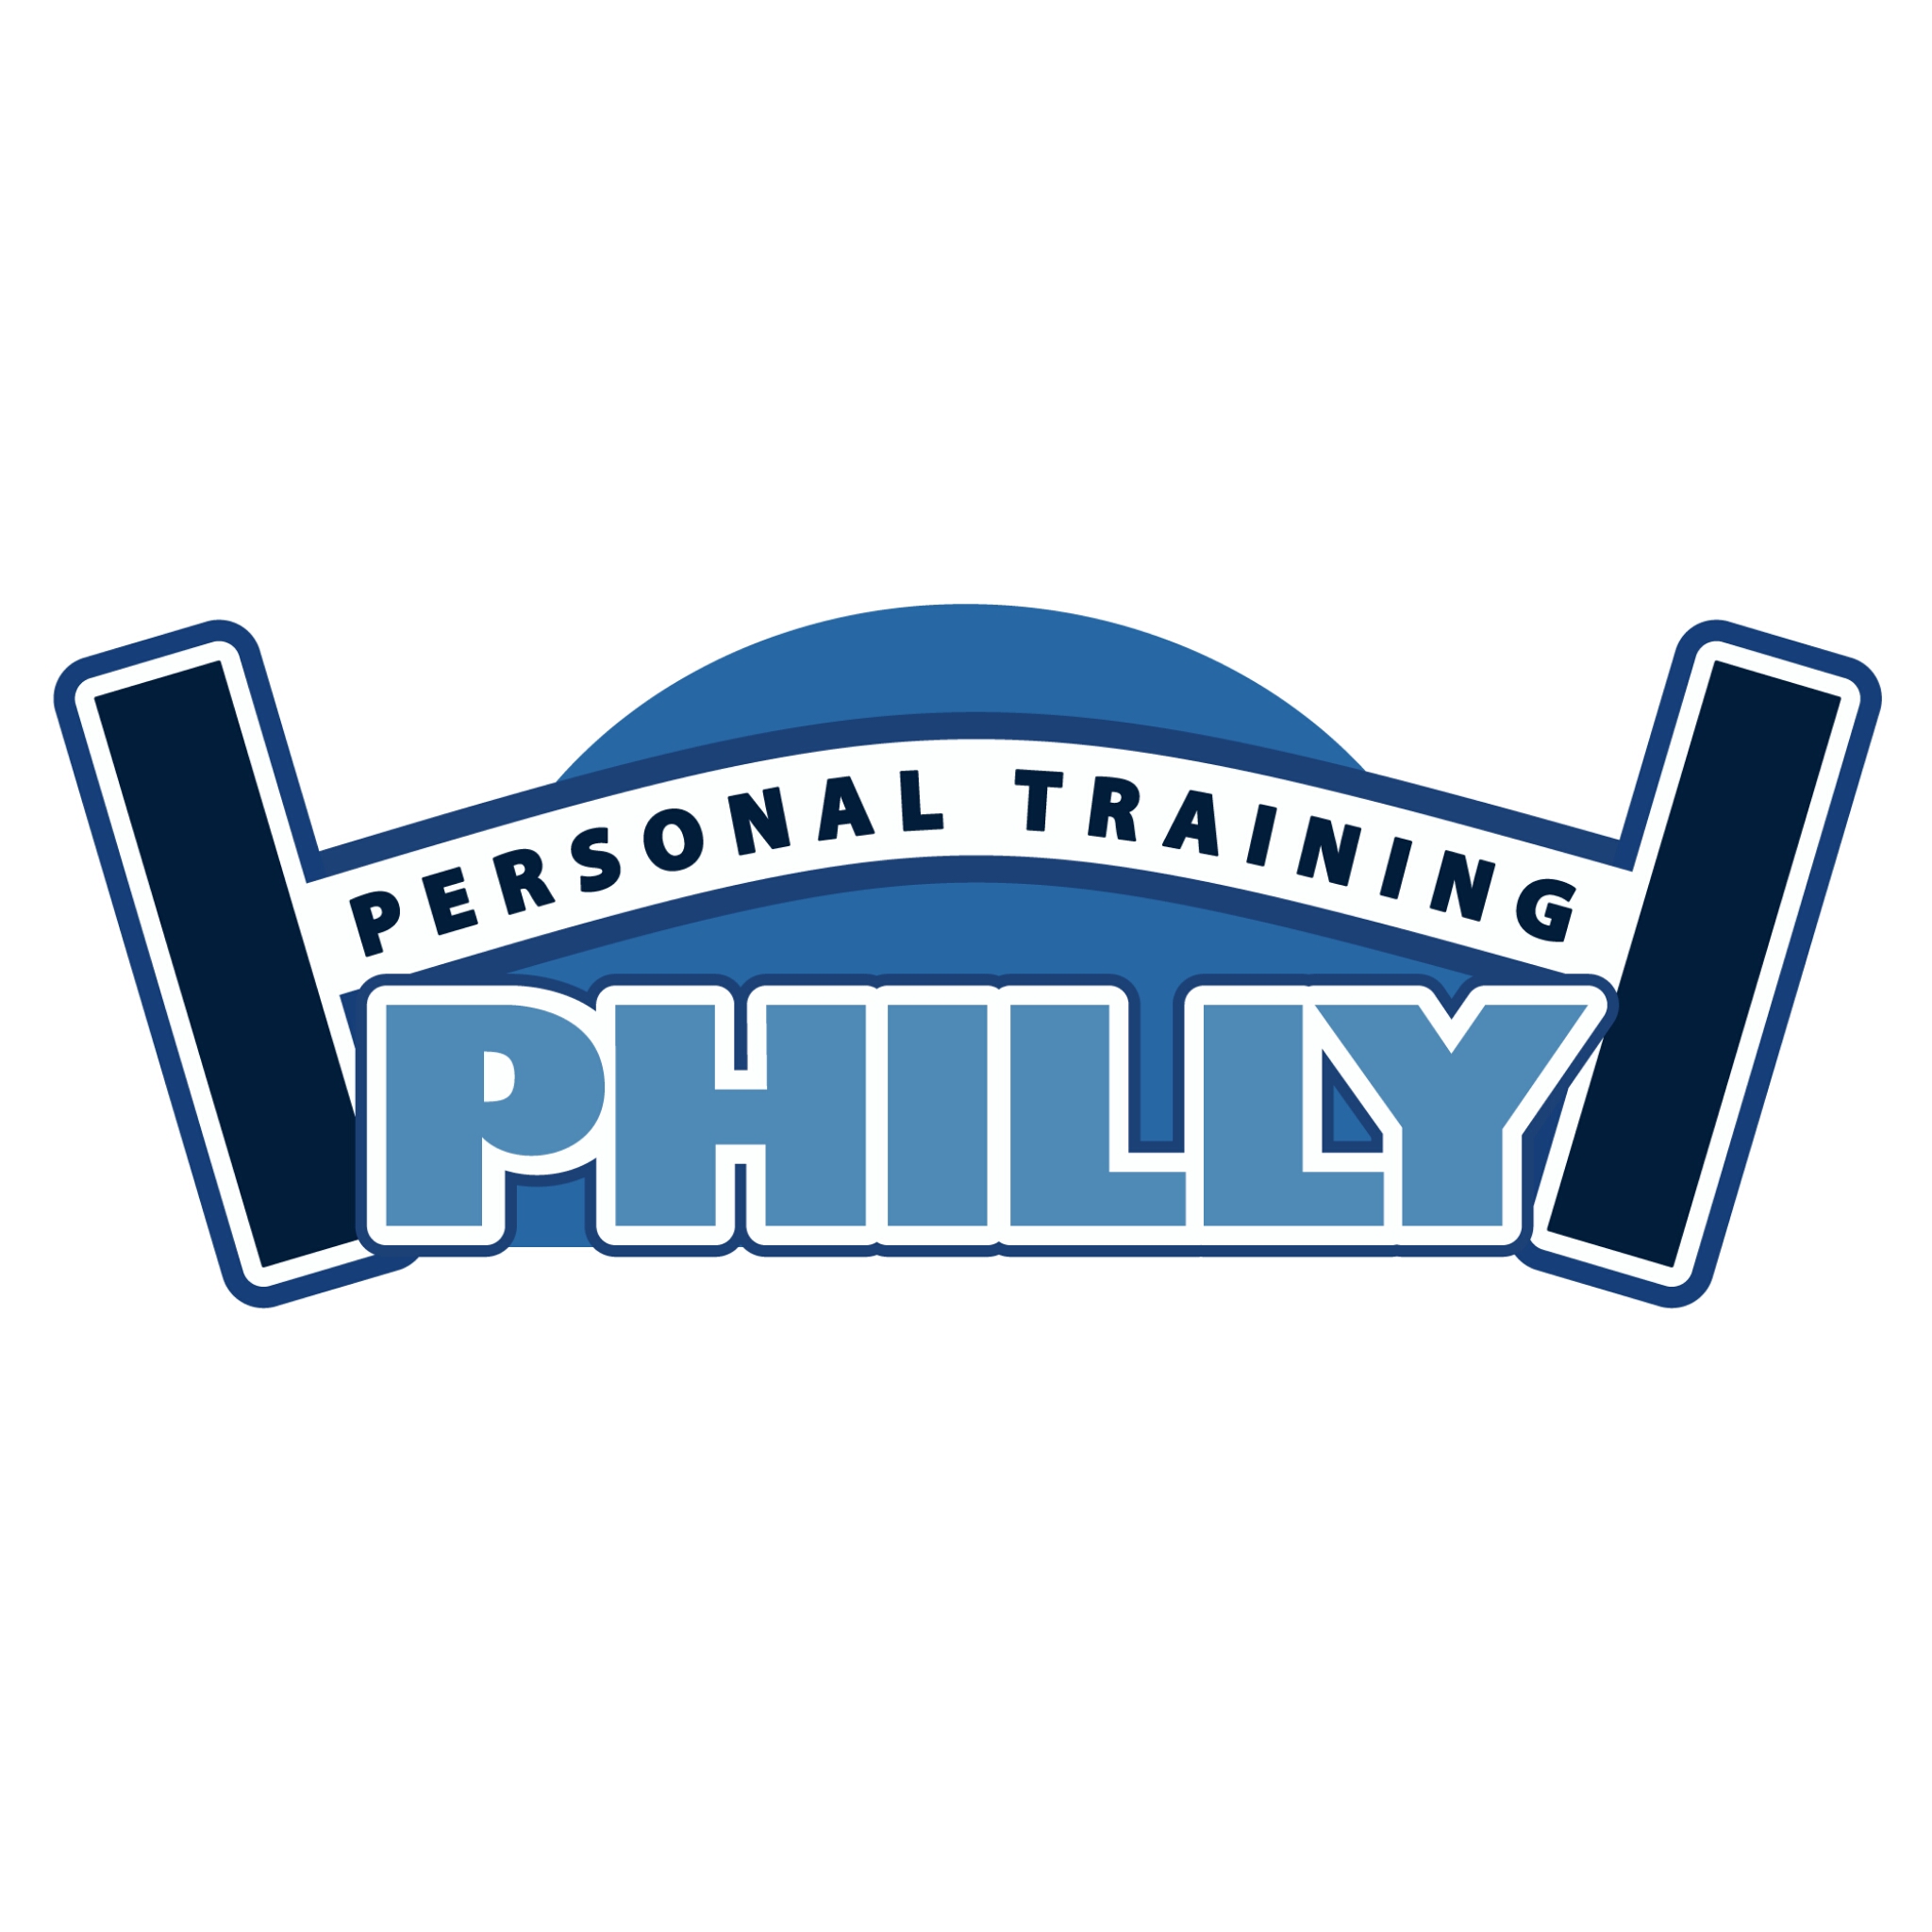 Philly Personal Training Logo